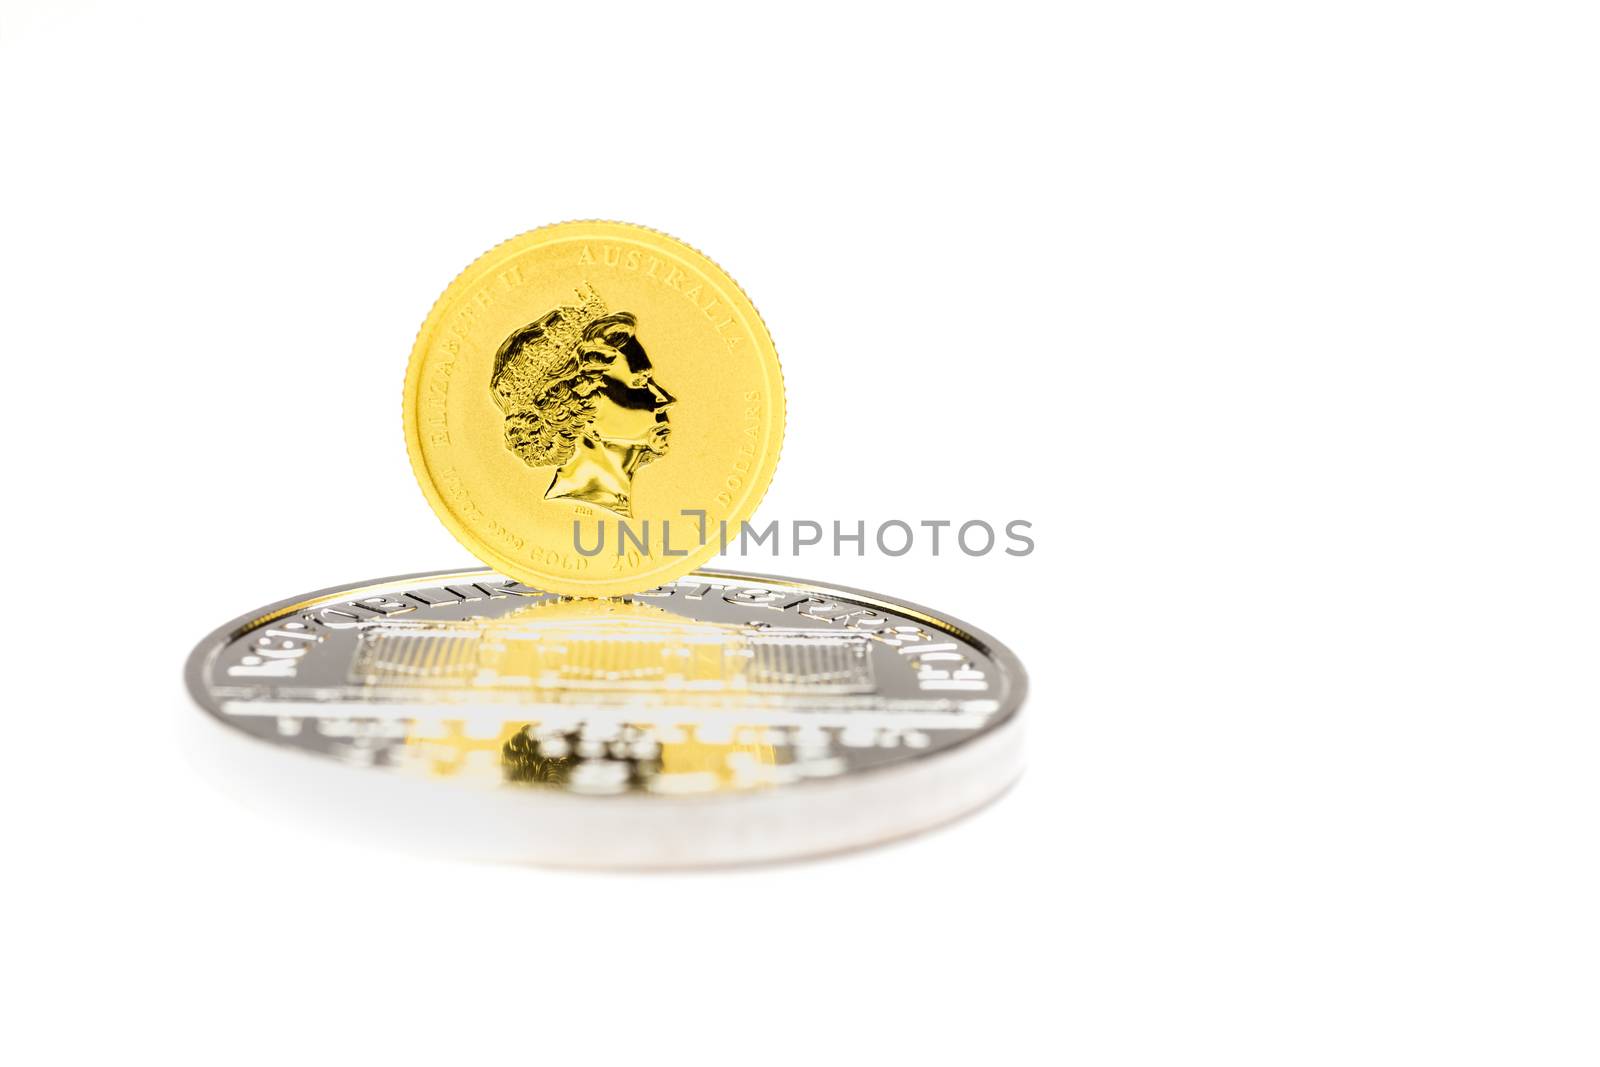 Golden dollars coin standing on silver bullion isolated on white background